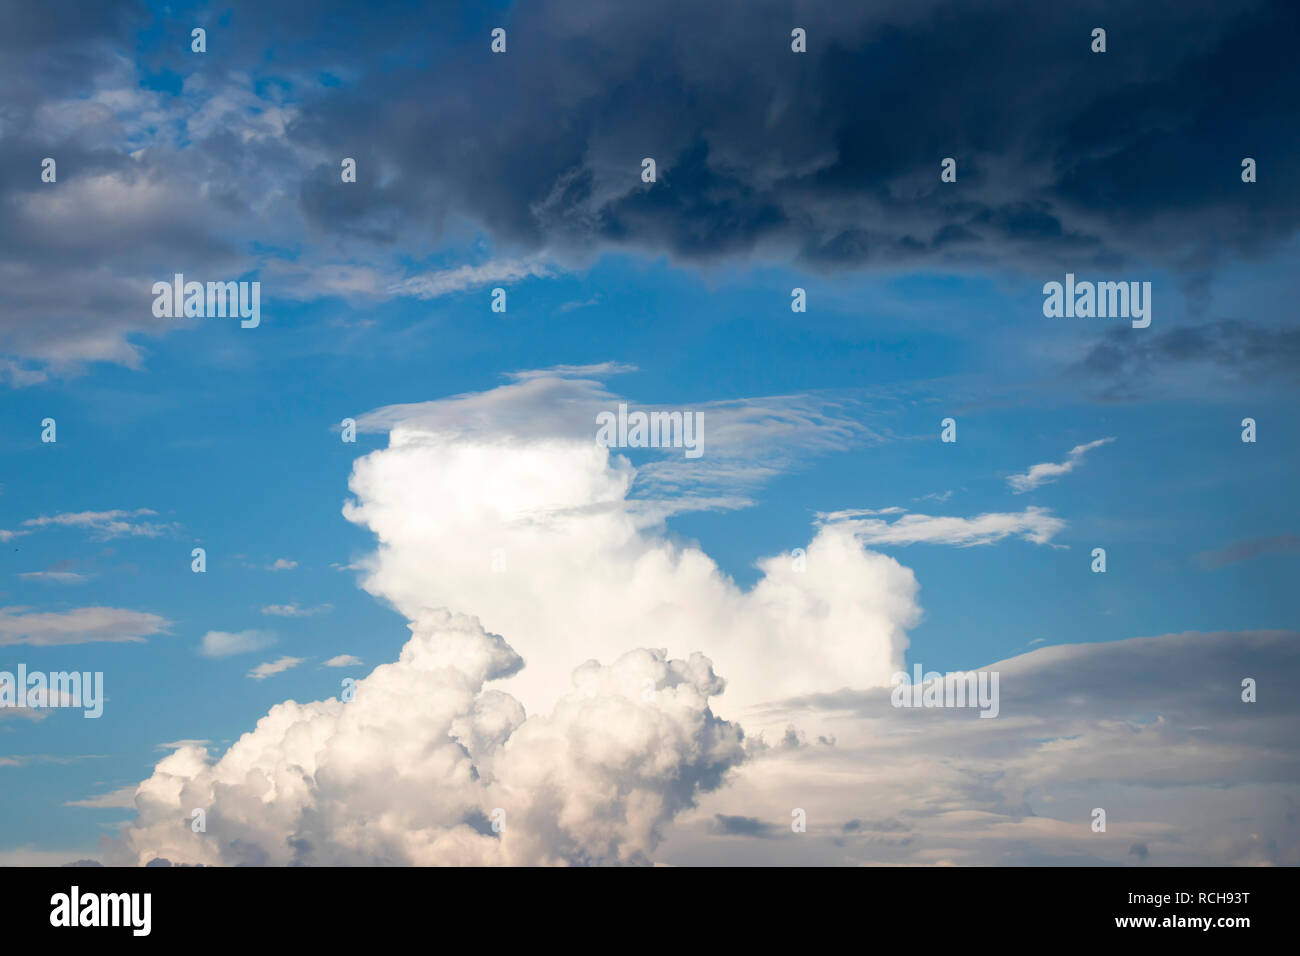 Cloudy sky: Contrast of fluffy bright and dark rainy clouds show quick weather change during strong wind Stock Photo